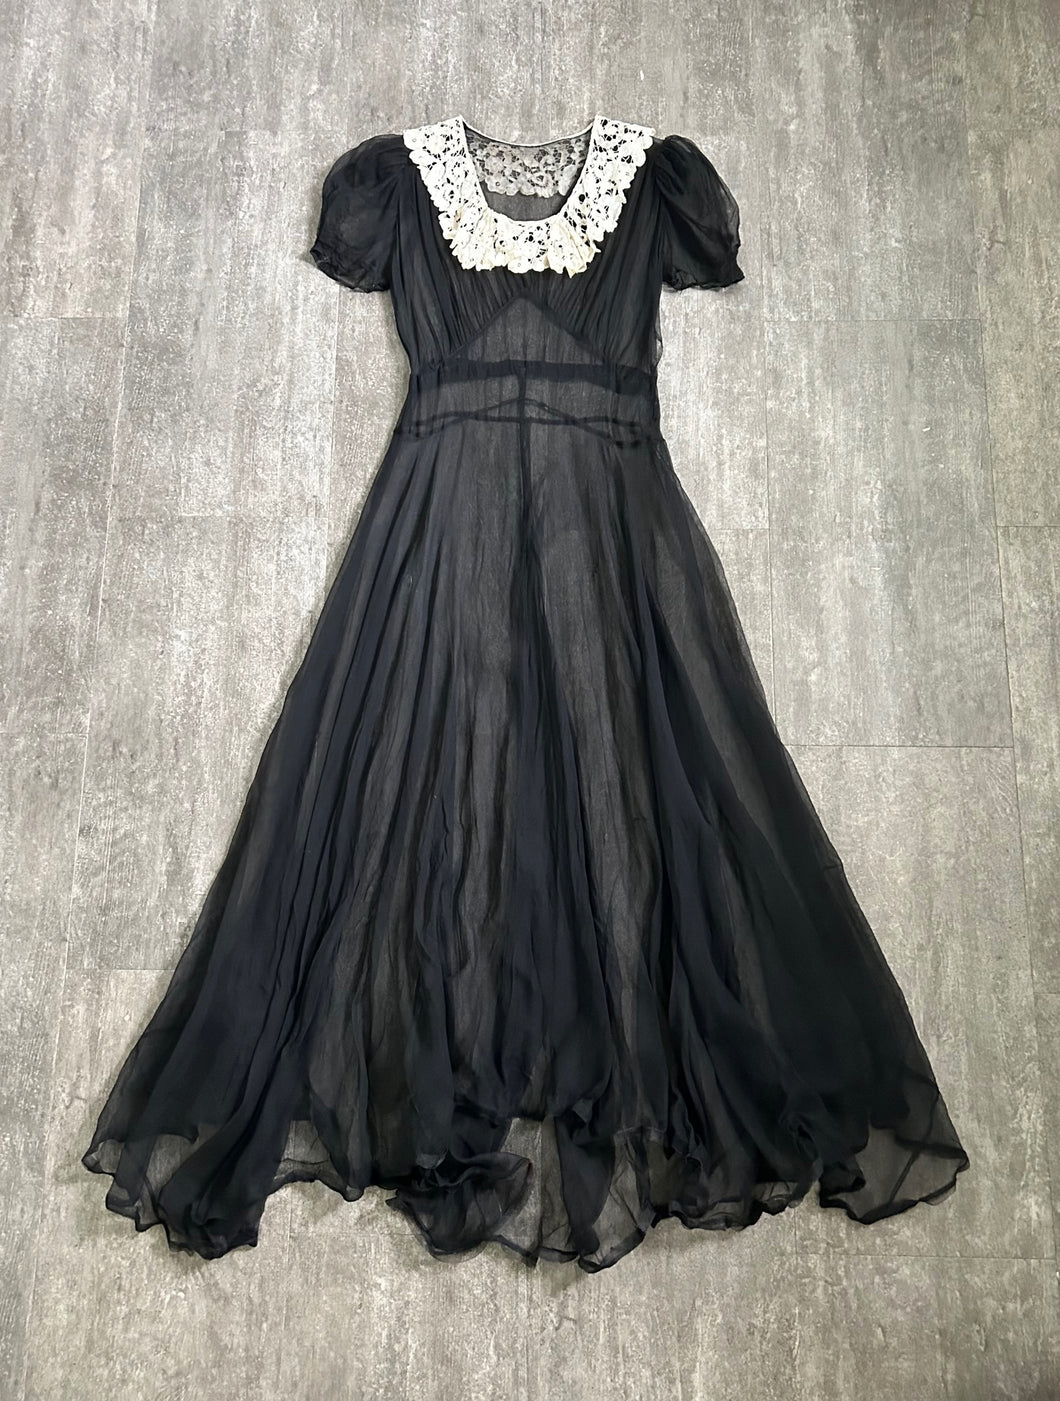 1930s sheer gown . vintage 30s black dress . size m to l